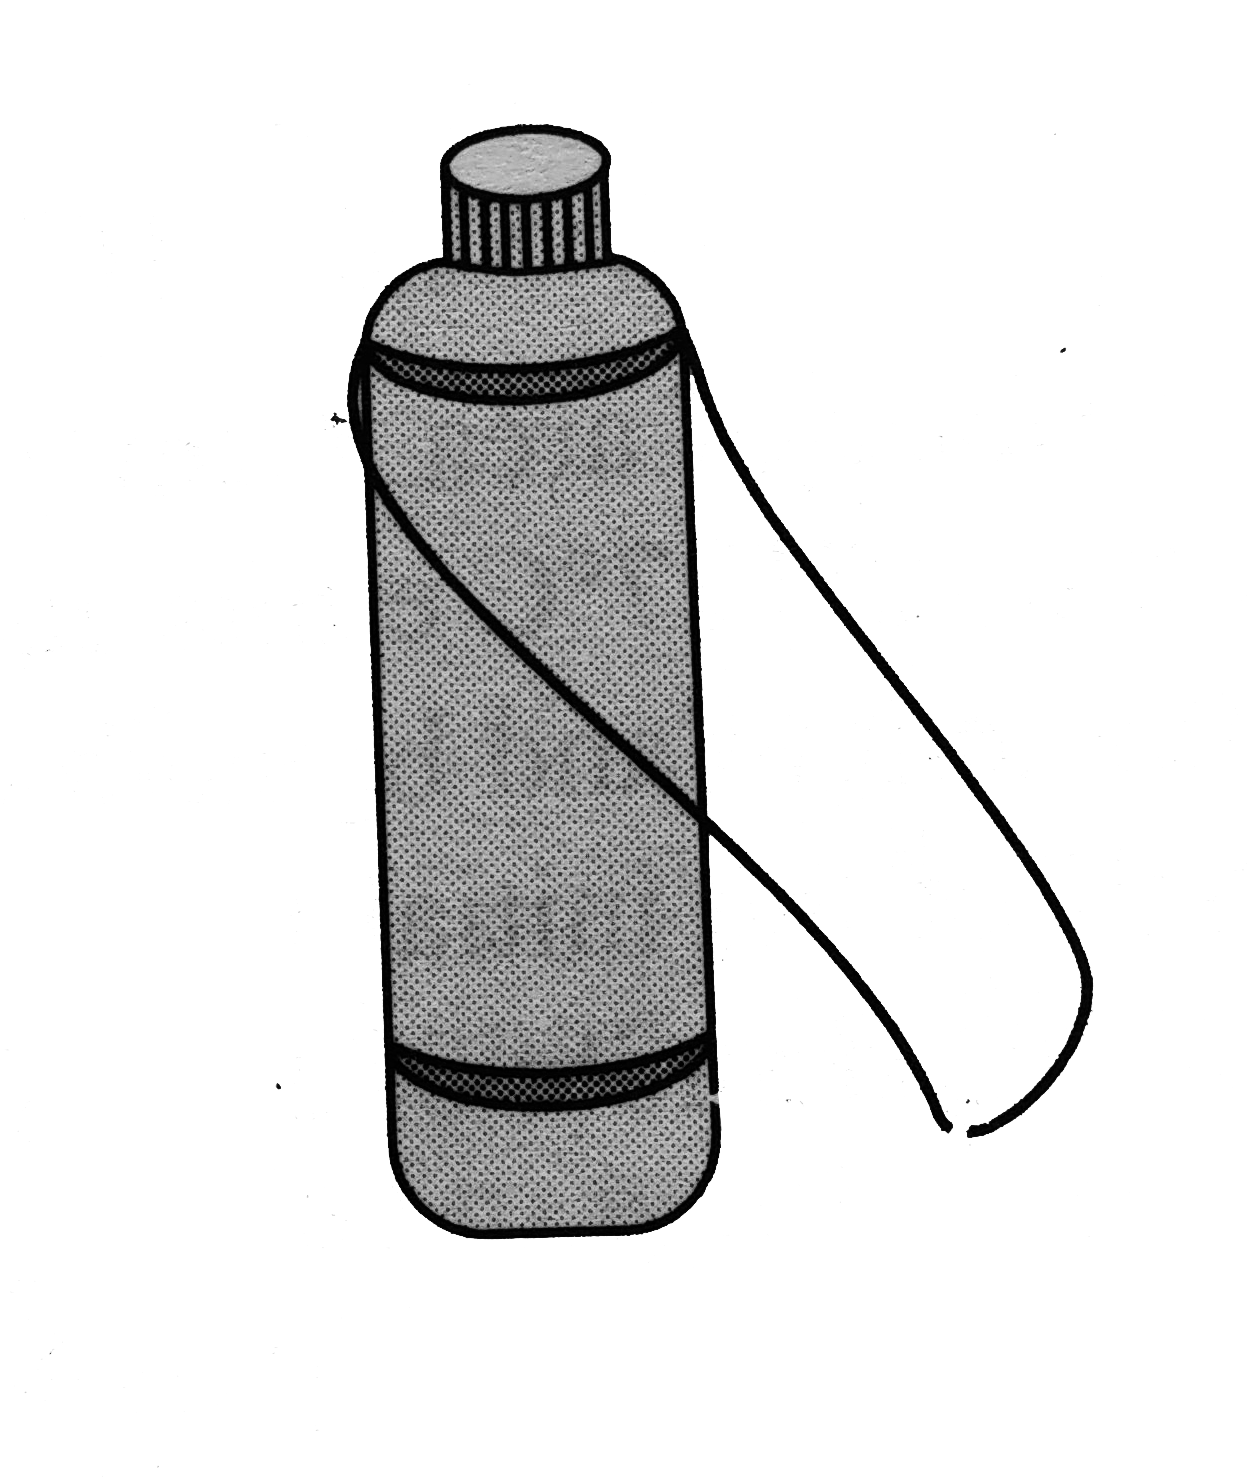 The only possibility of heat flow in a thermos flask is through its cork which is 75cm^2 in area and 5 cm thick its thermal conductivity is 0.0075 cal//cm-s-^@C. The outside temperature is 40^@C and latent heat of ice is 80 cal//g. Time taken by 500 g of ice at 0^@C in the flask to melt into water at 0^@C is